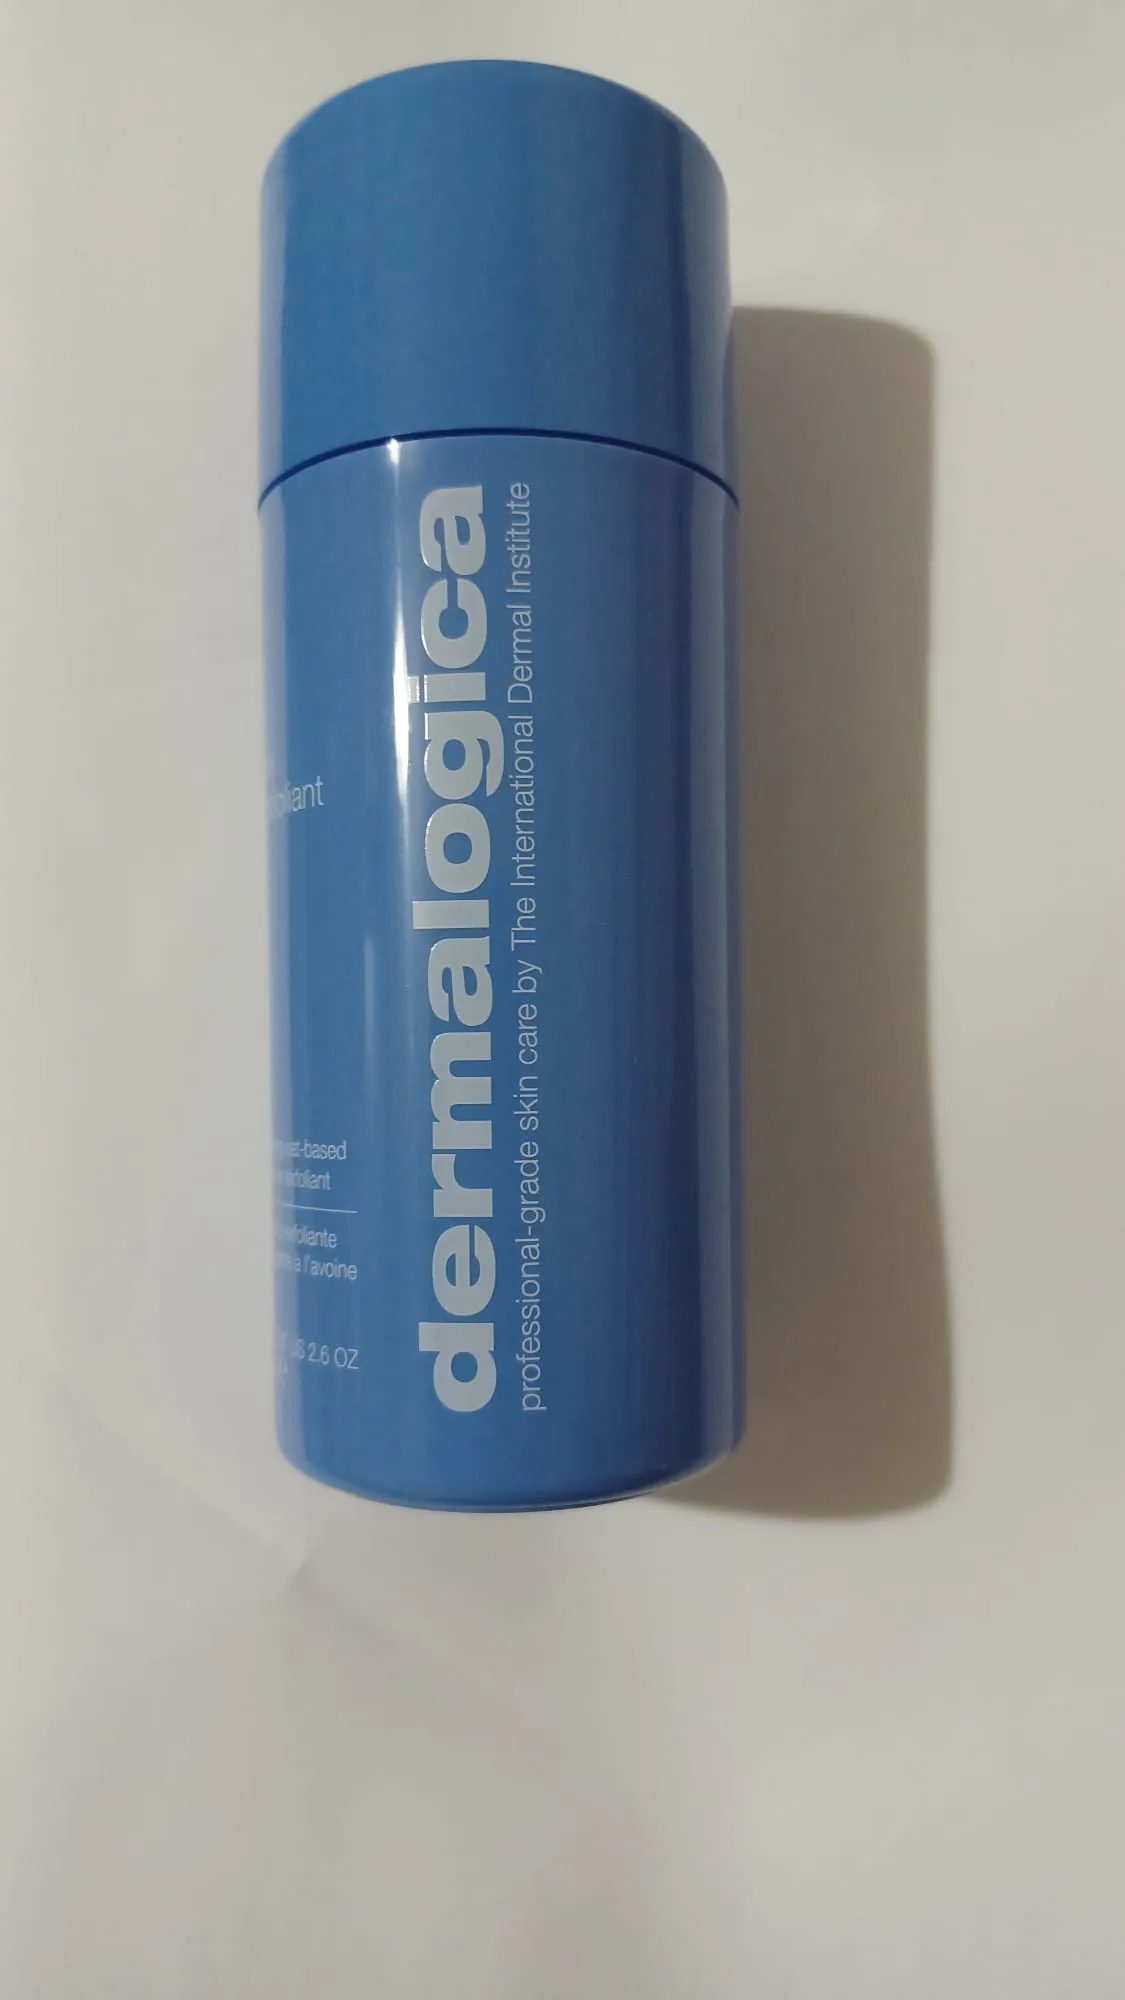 Dermalogica Skin Health Daily Microfoliant - review image